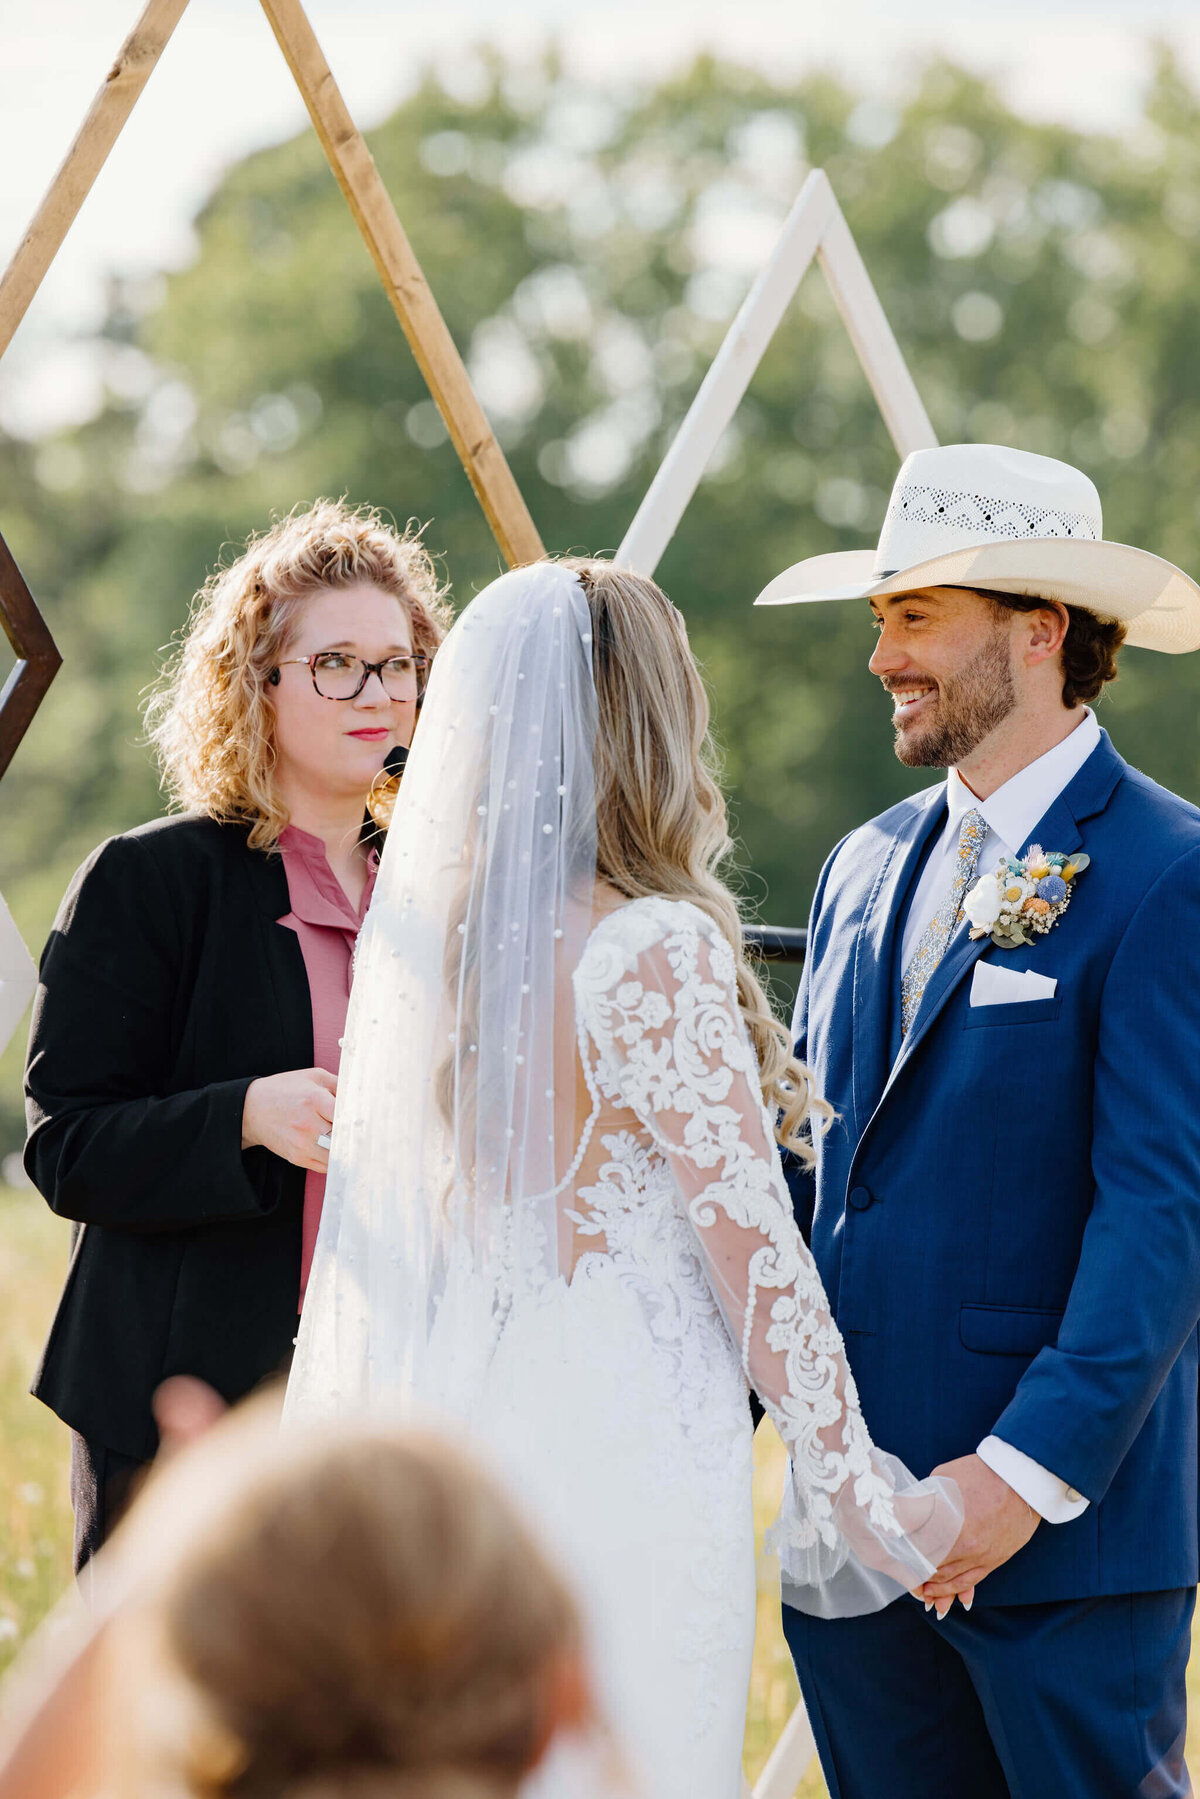 Bride and groom exchanging vows during spring wedding day ceremony